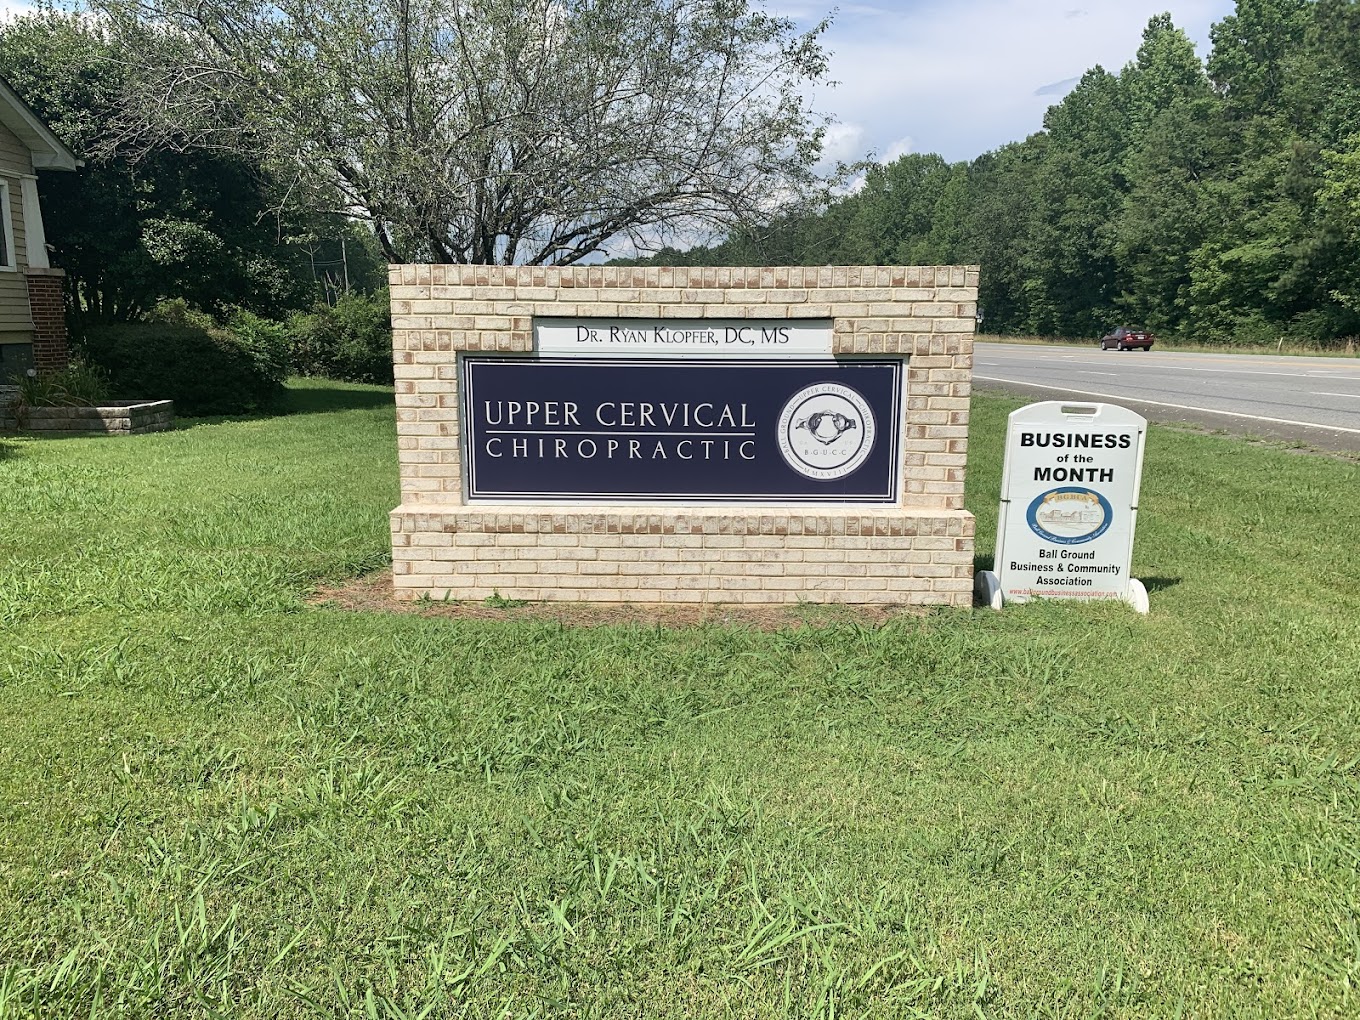 Business sign for Ball Ground Upper Cervical Chiropractic